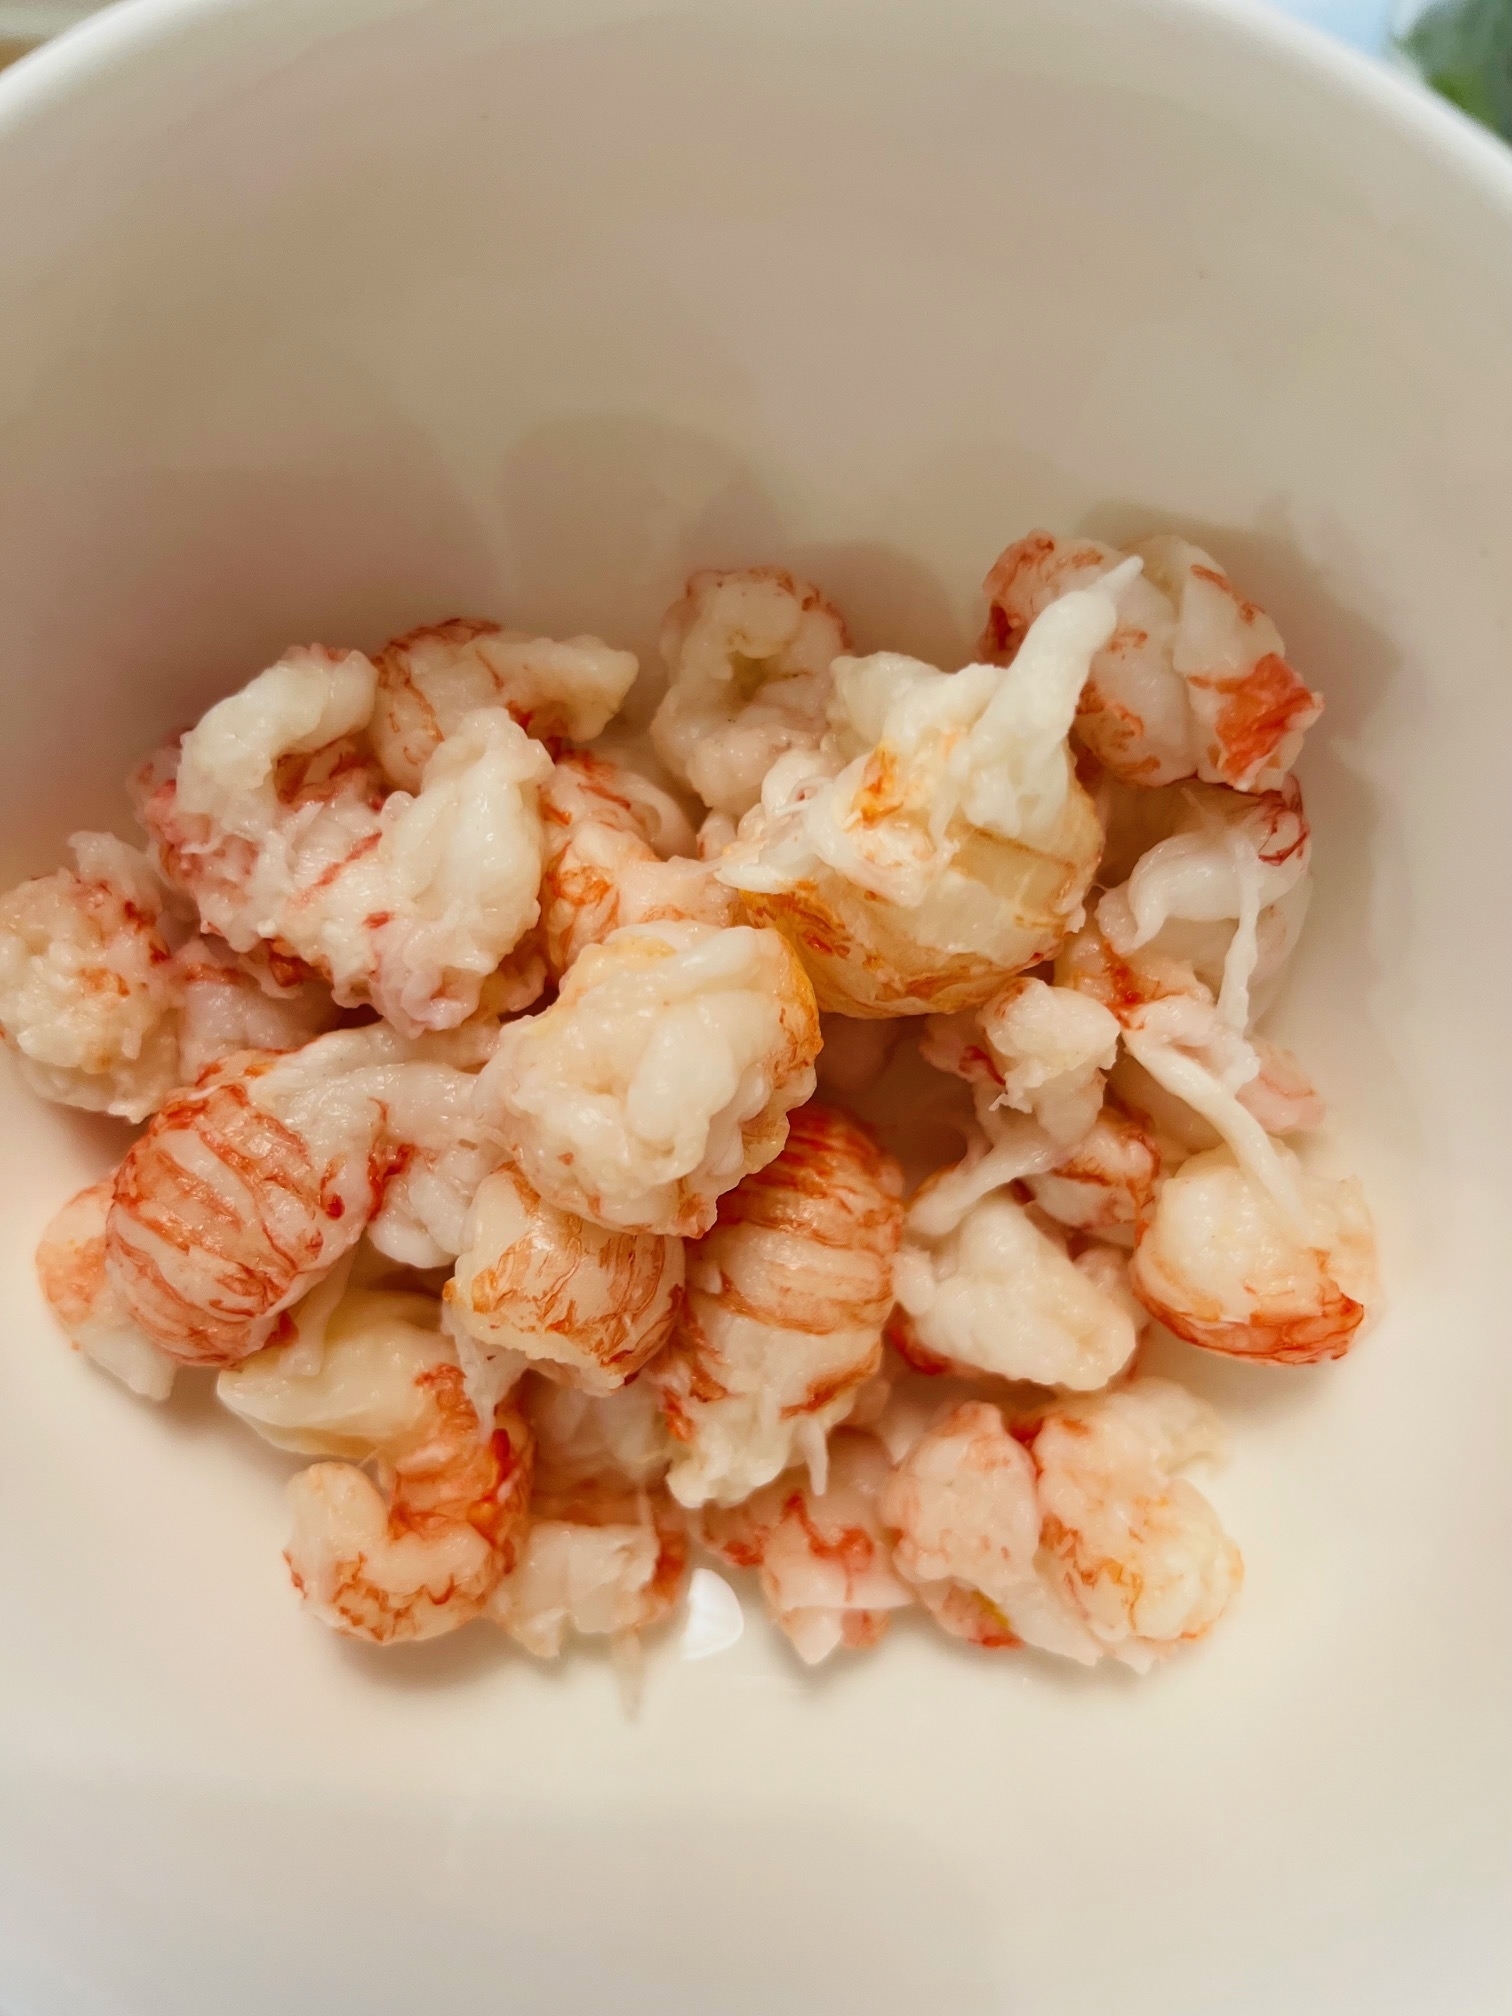 Thawed langostino meat in a bowl